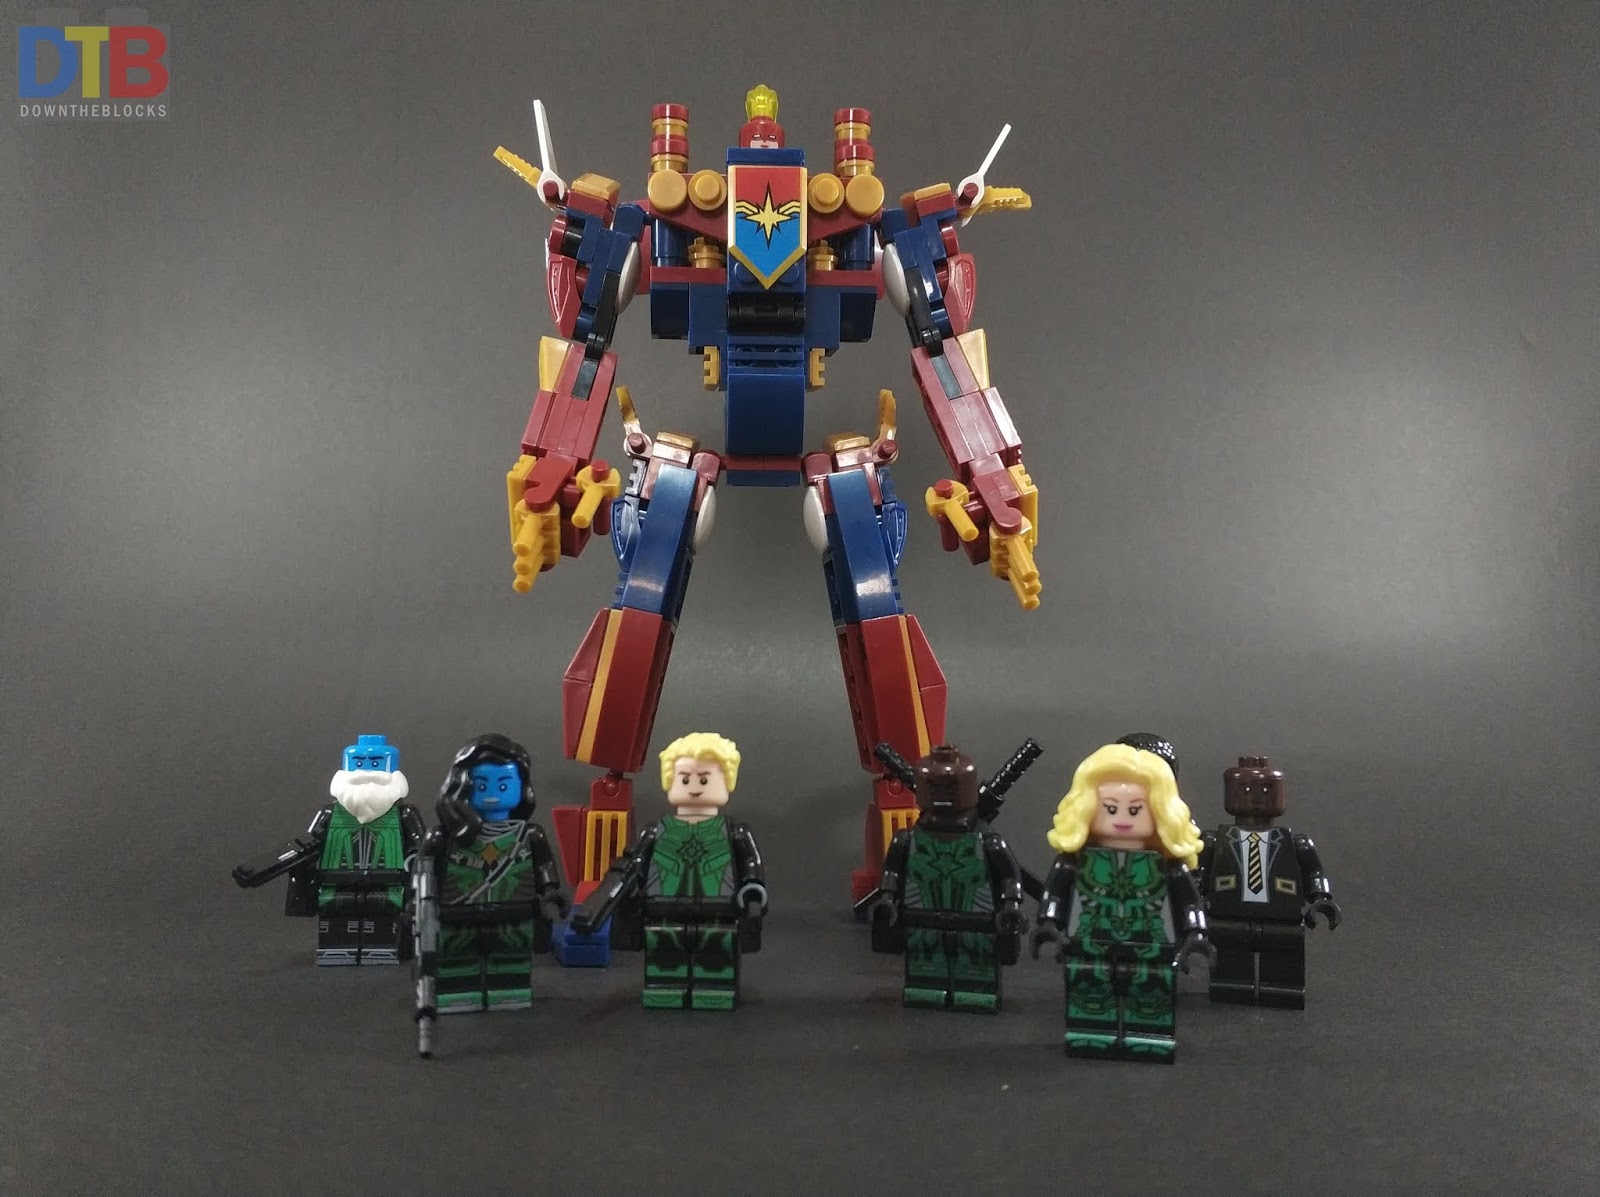 HJLepin 6920: Captain Marvel and Star Force Minifigs Review